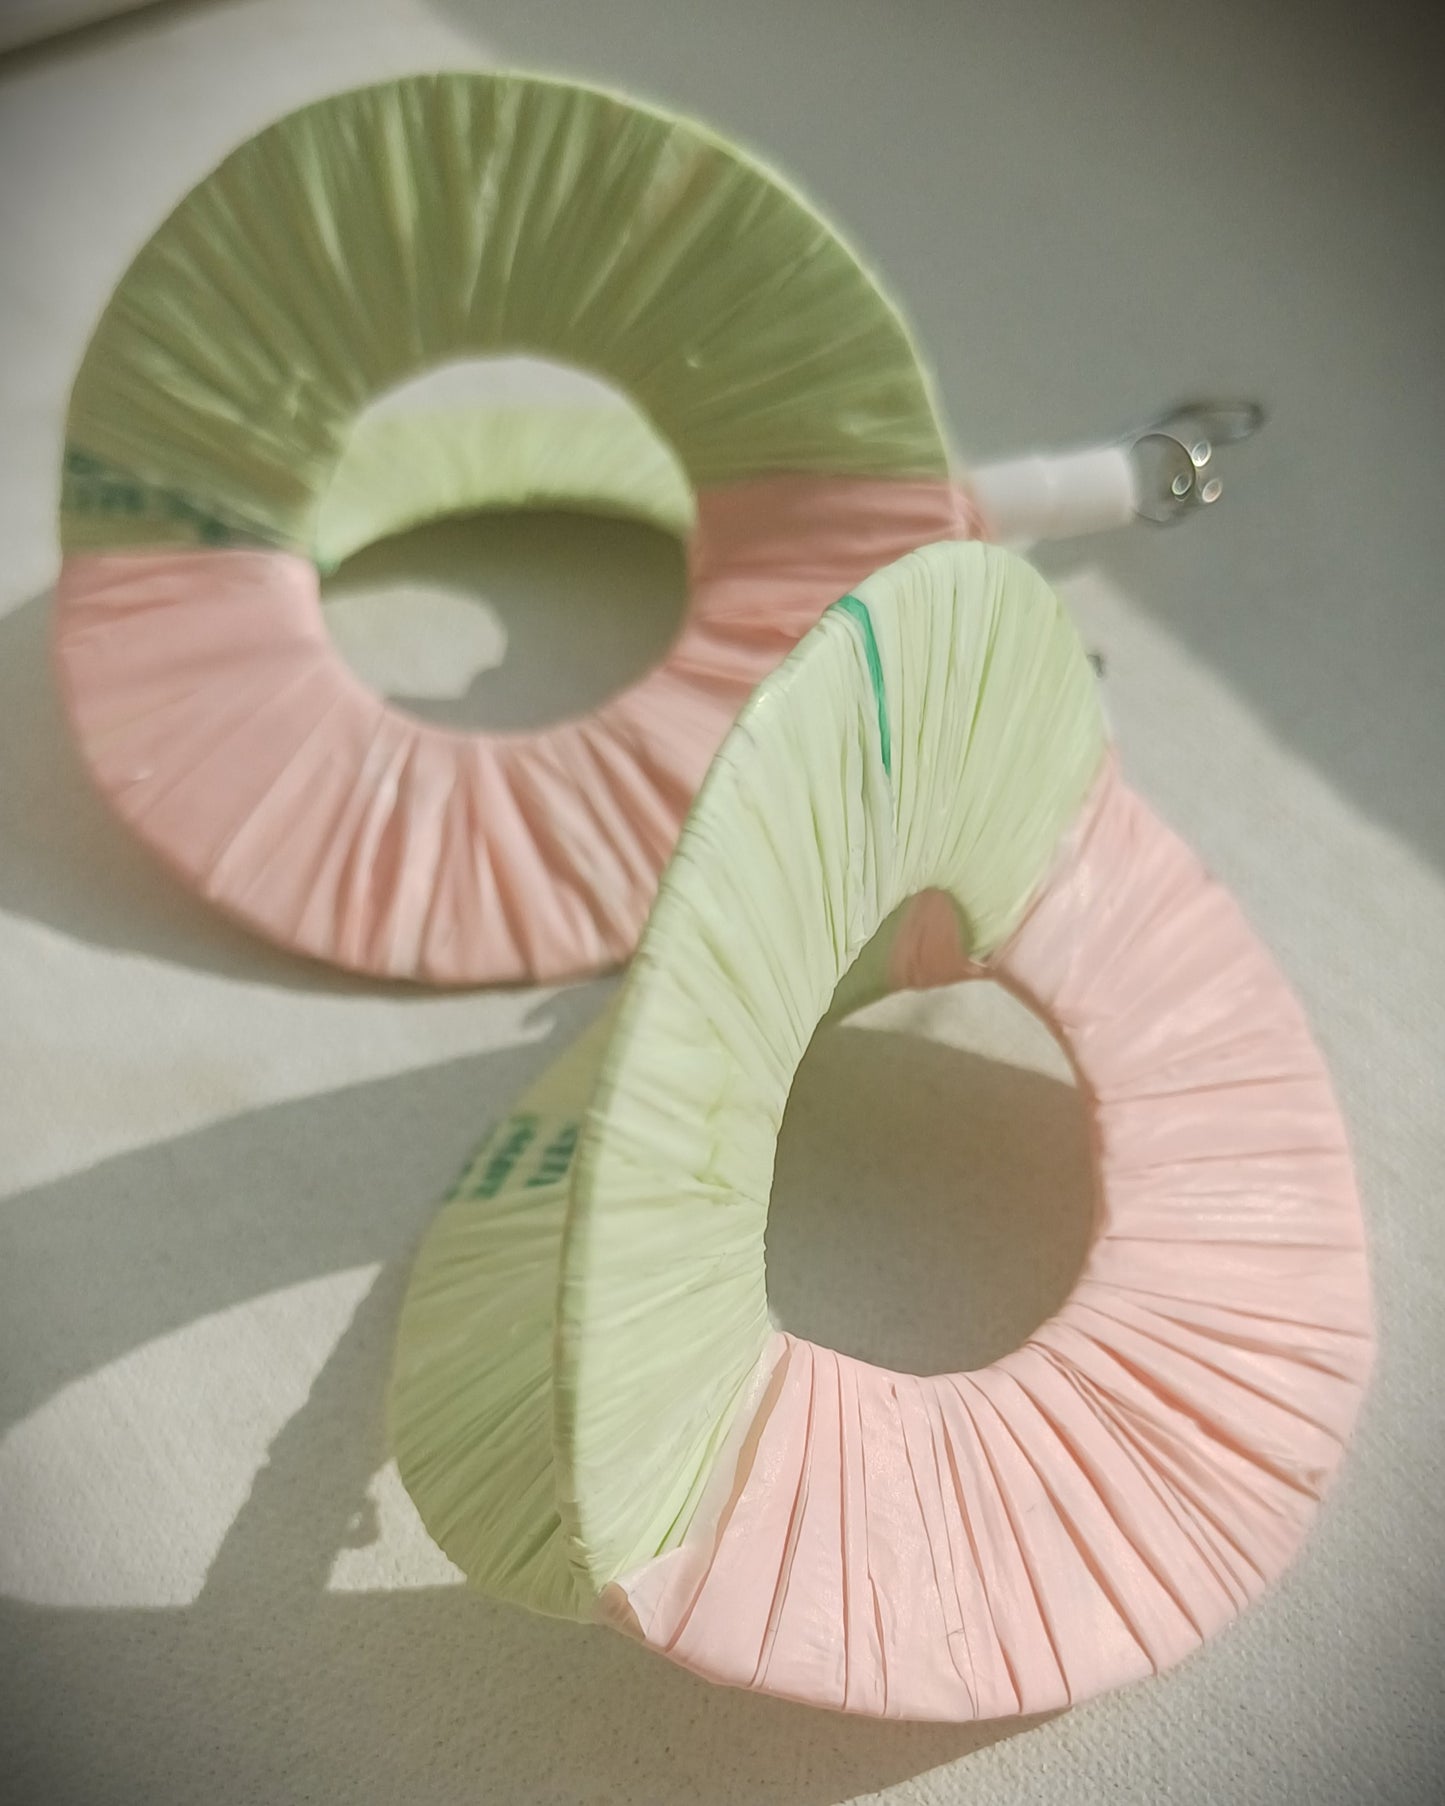 3D Green and Pink Pastel Hoops PungaGlow Eco Earrings Upcycled Jewelry